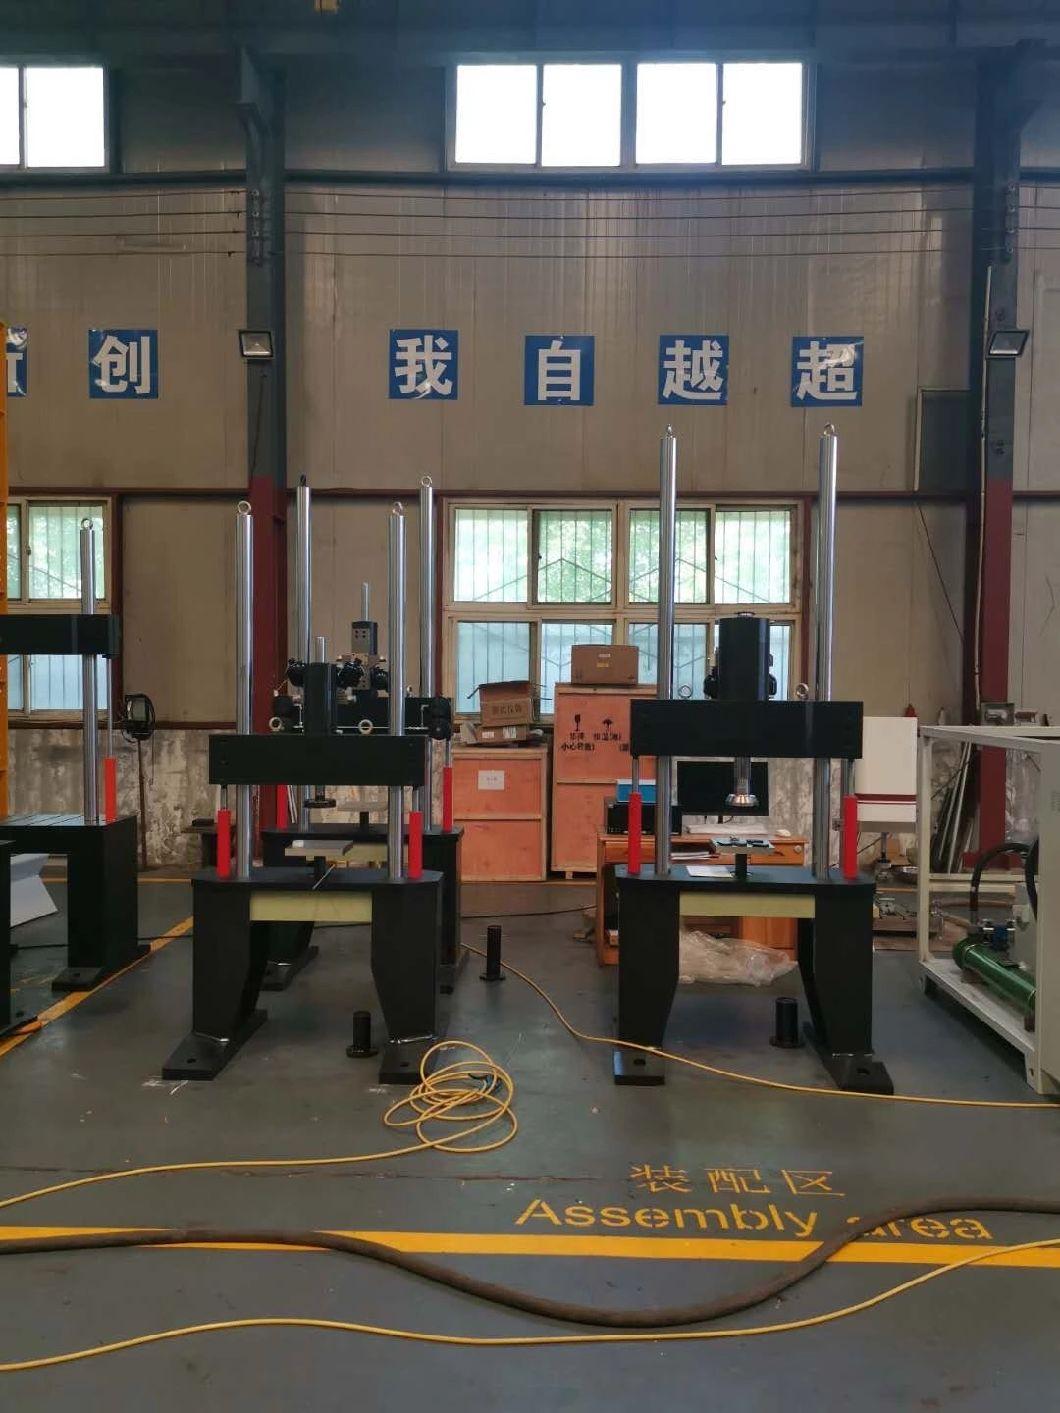 Pws-25 Dynamic and Static Fatigue Testing Machine for Laboratory Factory Direct Sales High-Quality and High-Precision